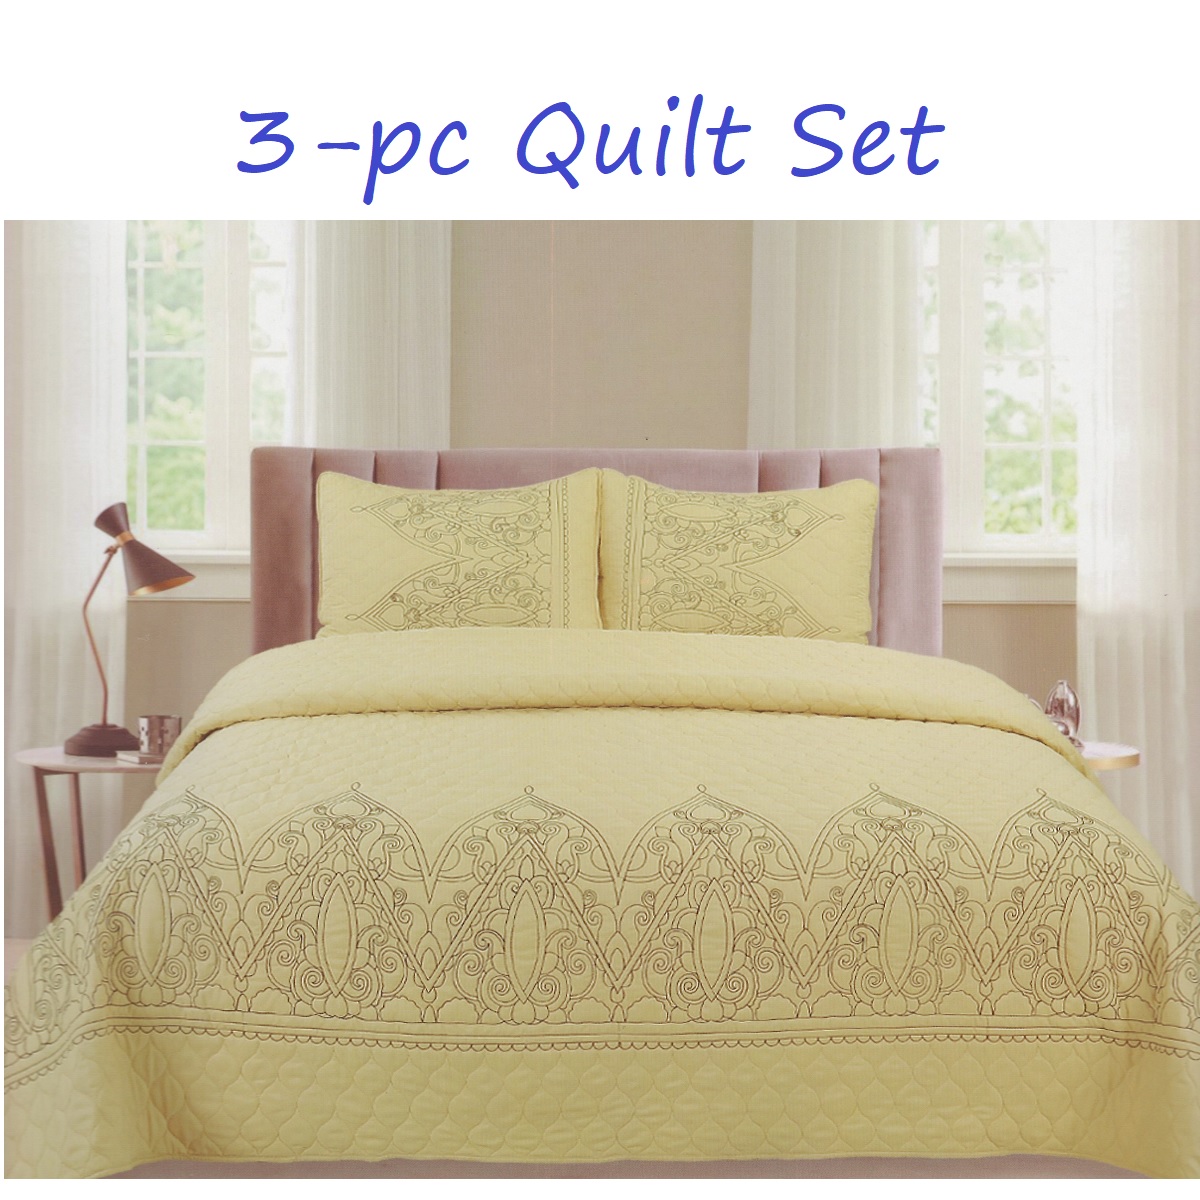 Sophisticated Quilted Bedspread Set - Cream Yellow Embroidered Design - 3 Piece Quilt Set - Queen & King Size